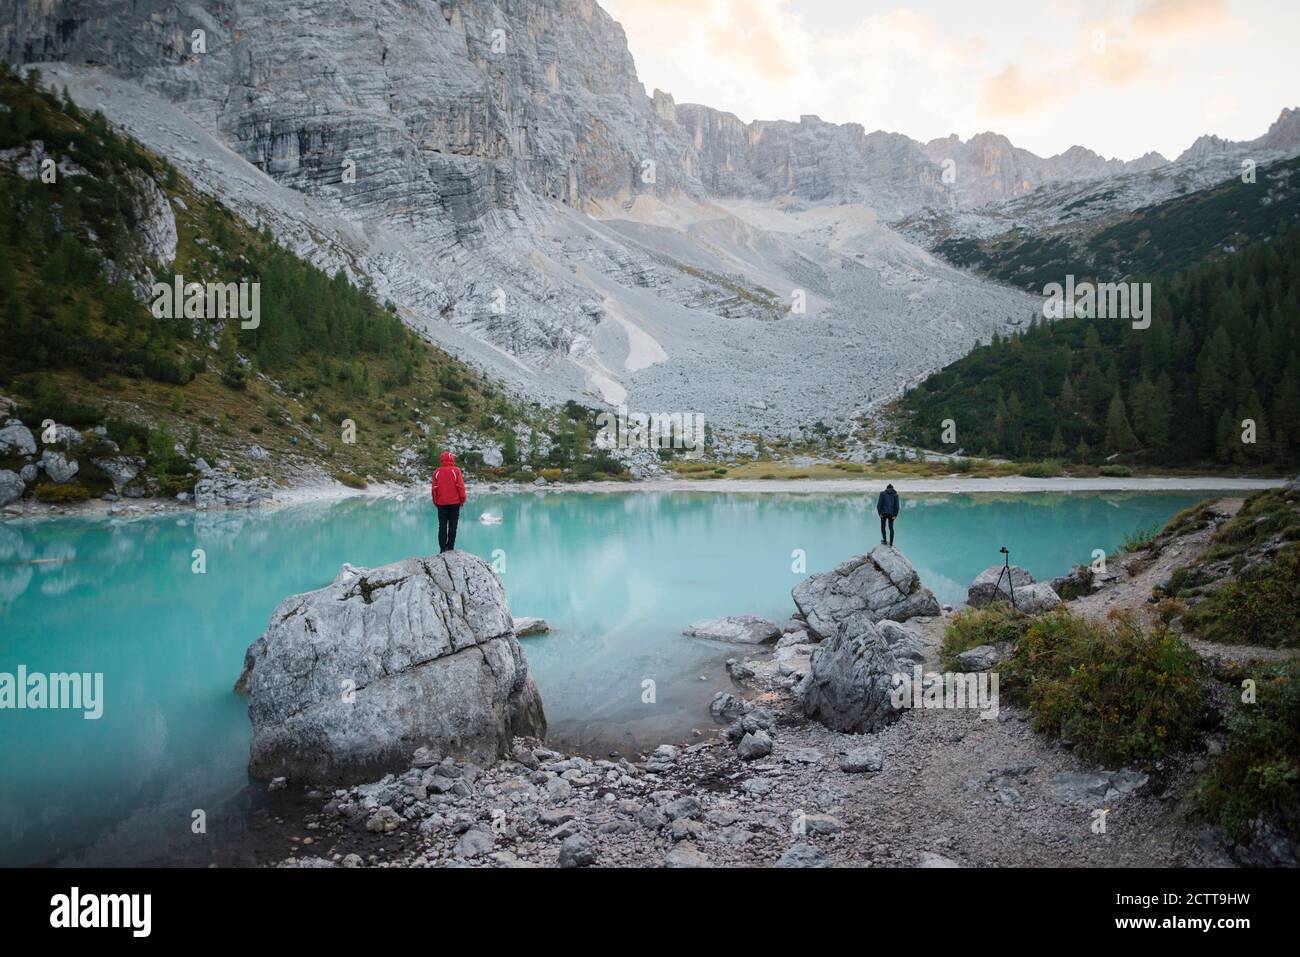 Italy, South Tyrol, Cortina d Ampezzo, lake Sorapis, Men standing on top of rock formations looking at view Stock Photo